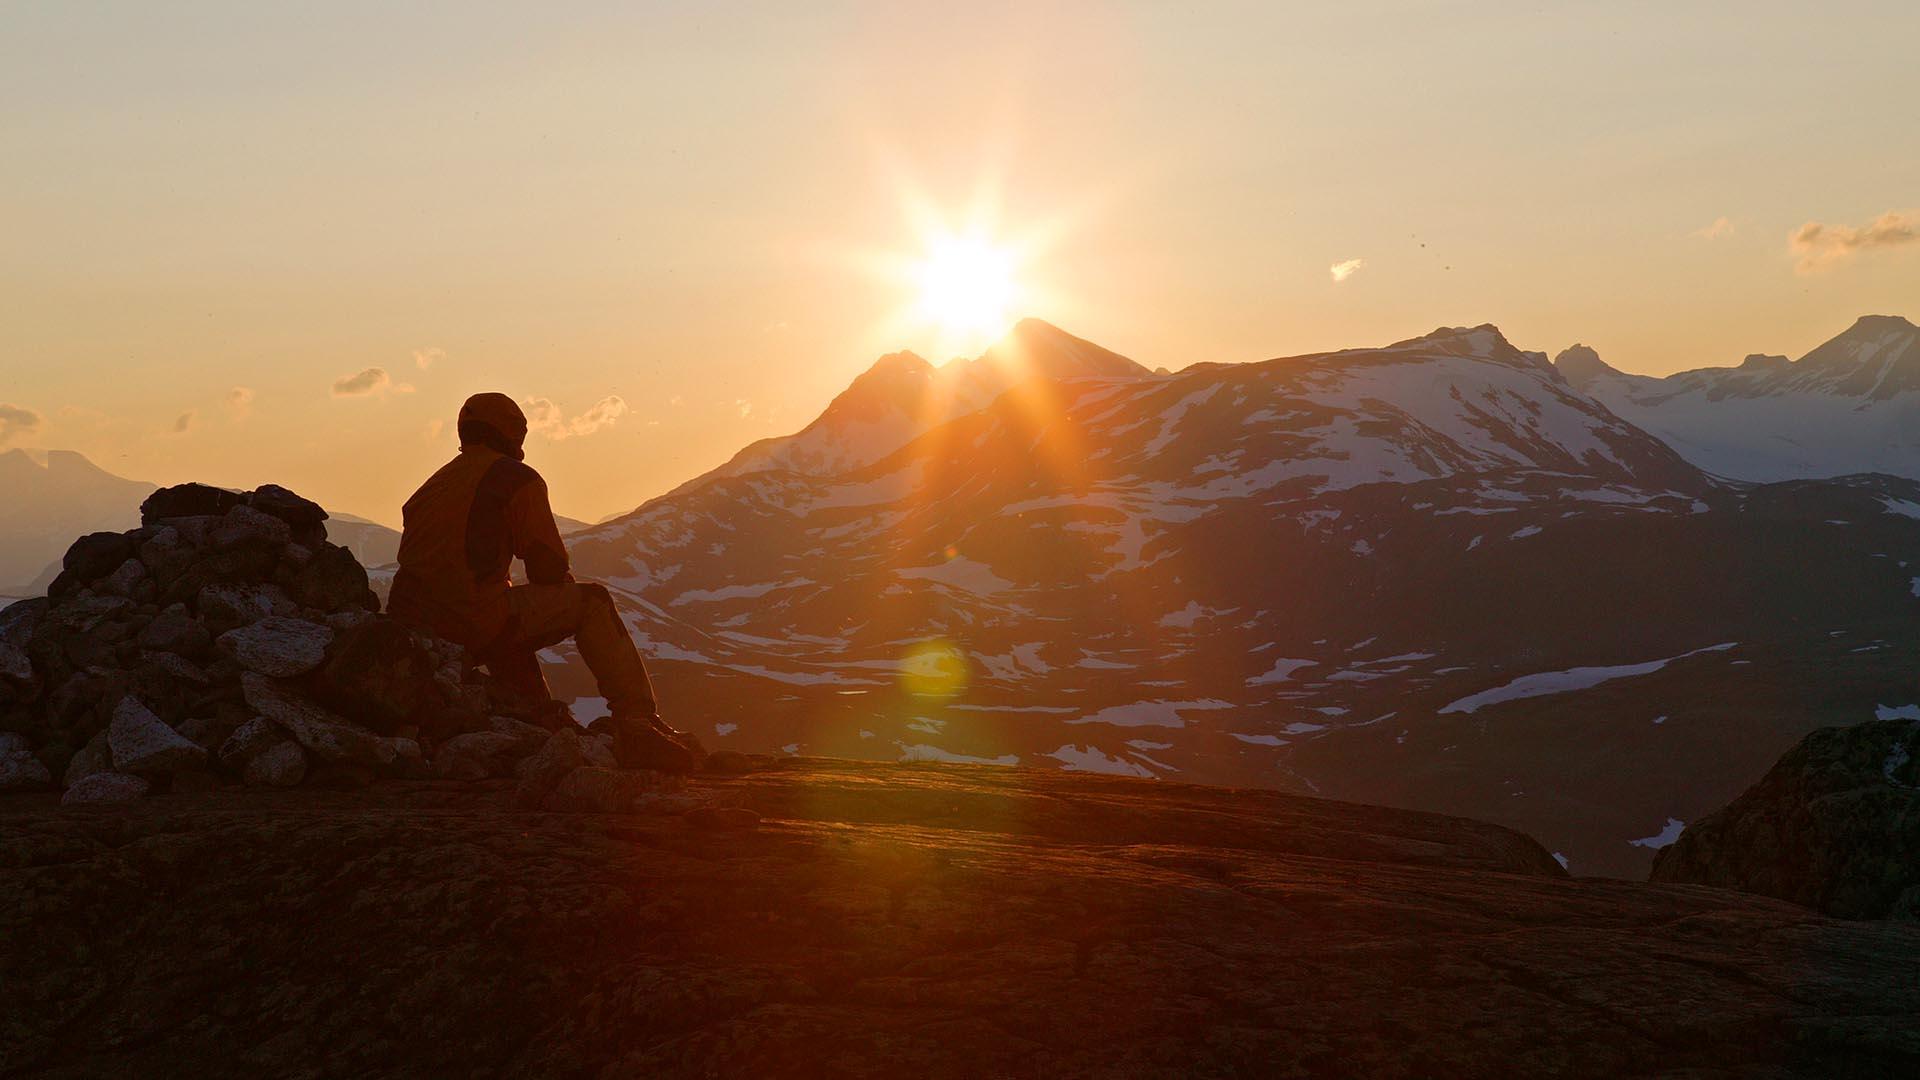 Man sitting on a mountain top watching the sun go down behind another mountain.